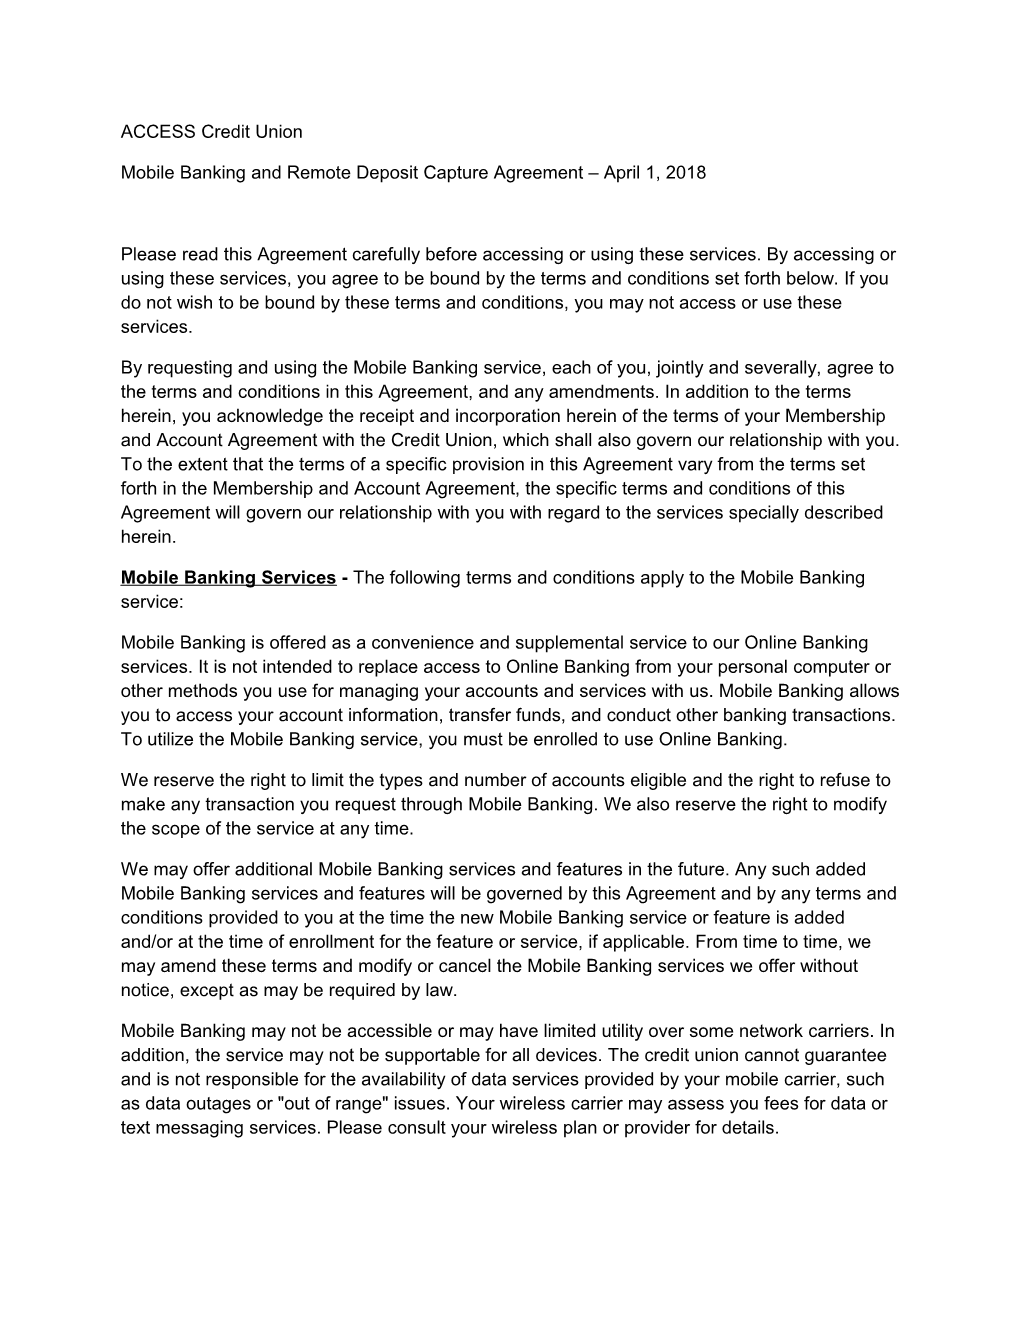 Mobile Banking and Remote Deposit Capture Agreement April 1, 2018